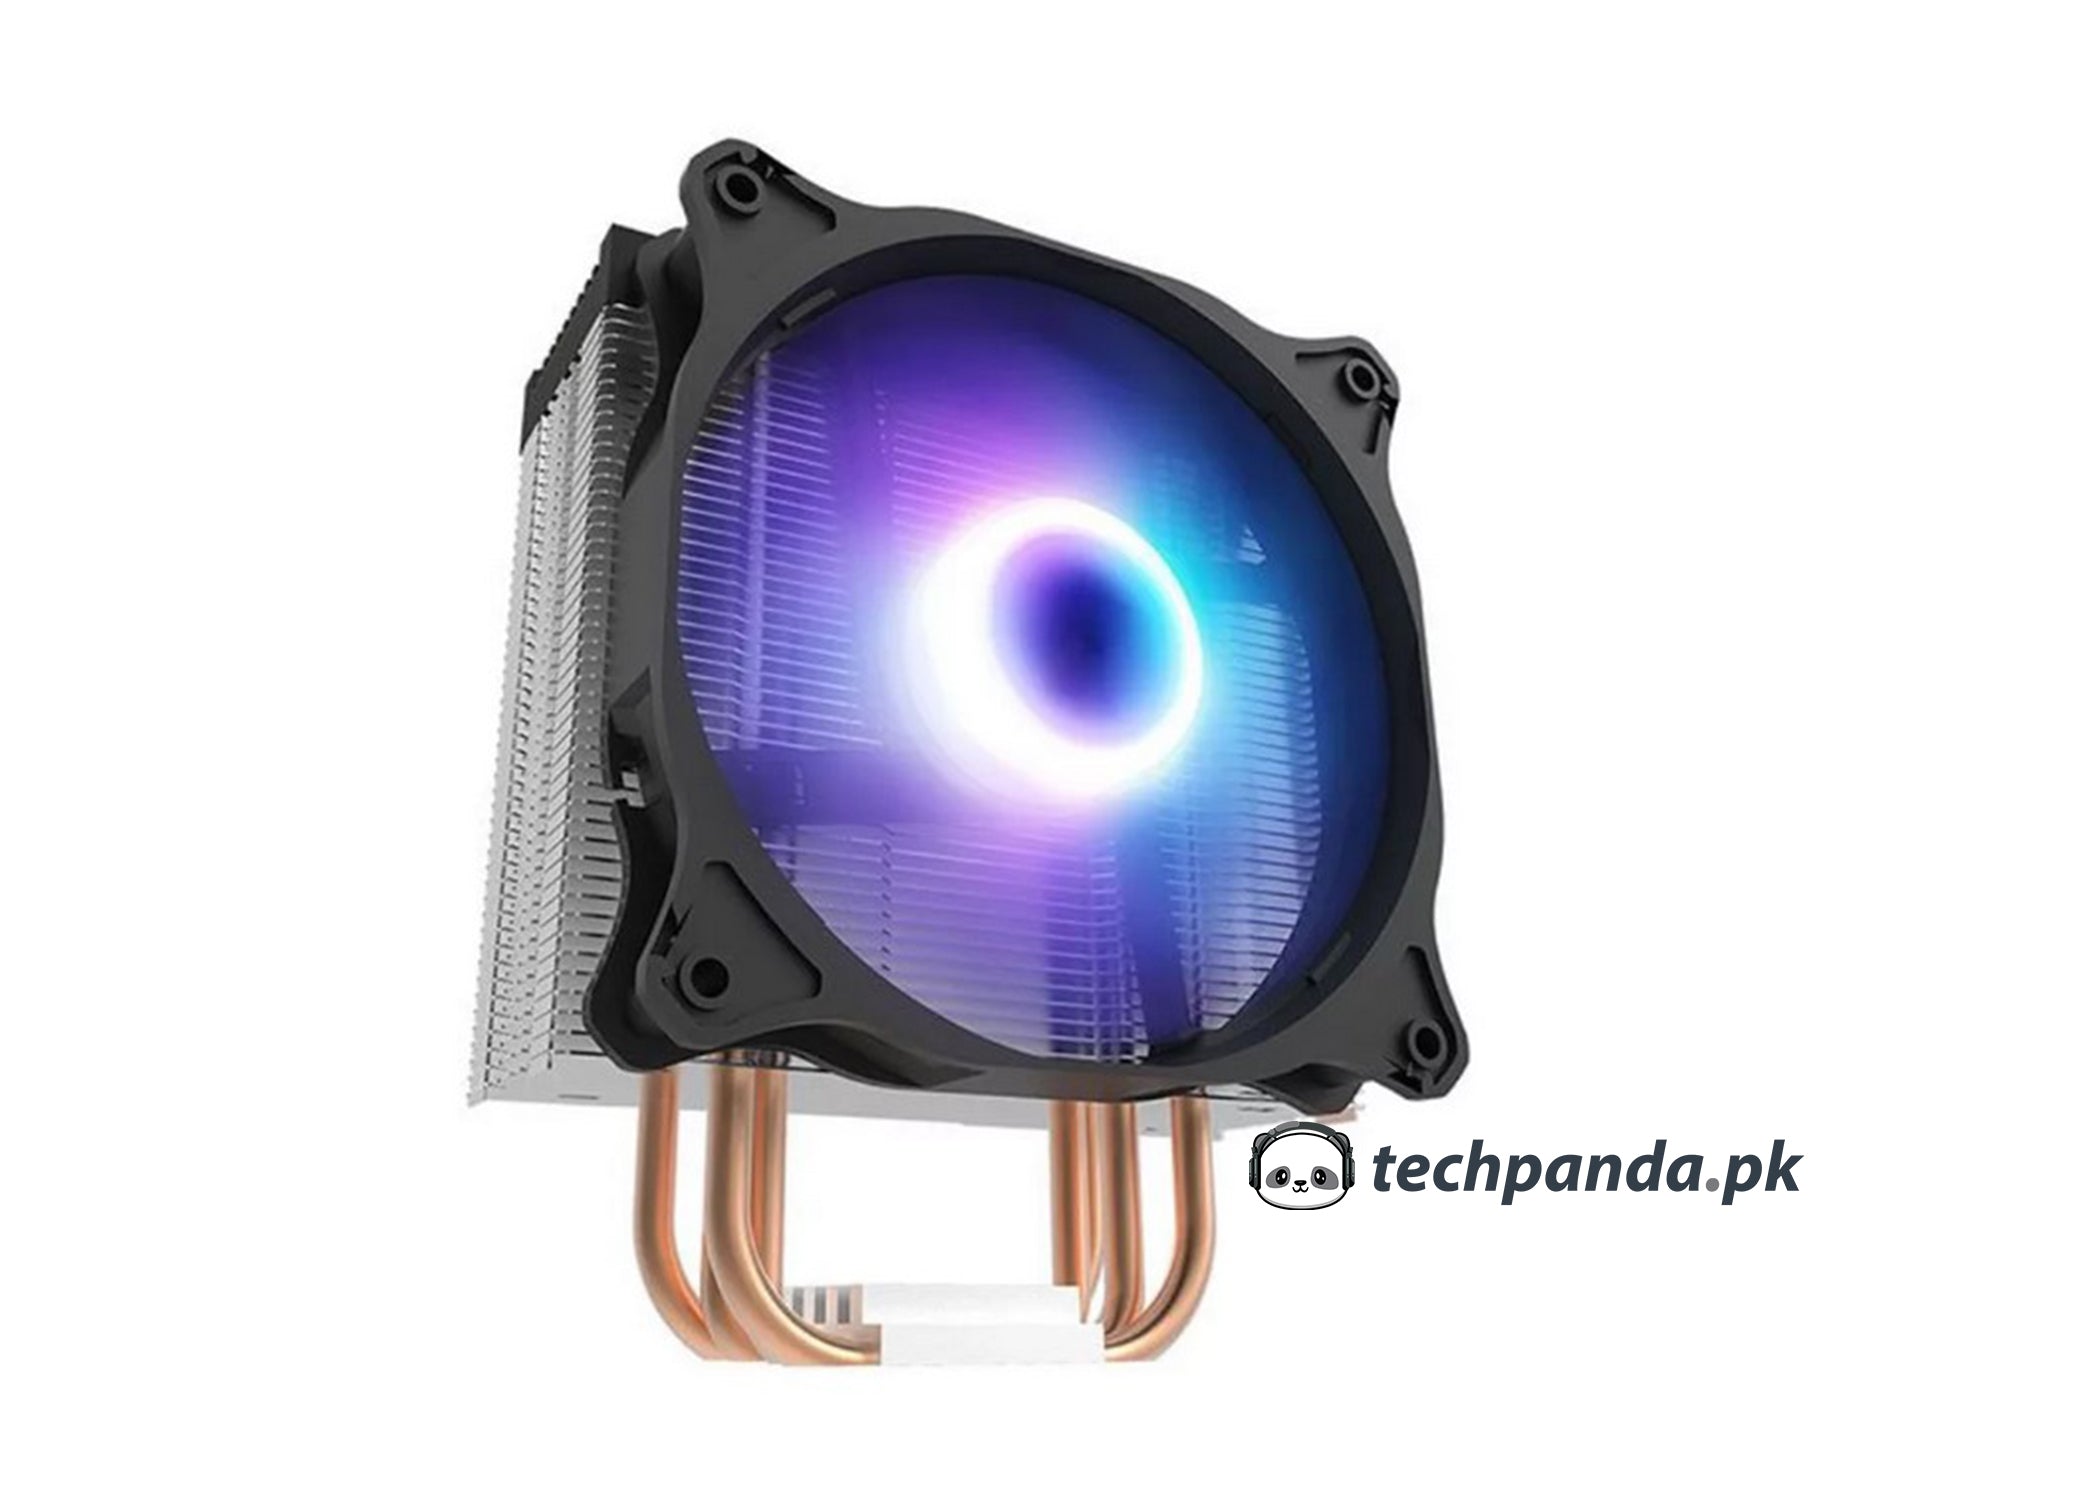 Darkflash Dark Air ARGB Air Cooler: Compact and Quiet CPU Cooler with RGB Lighting